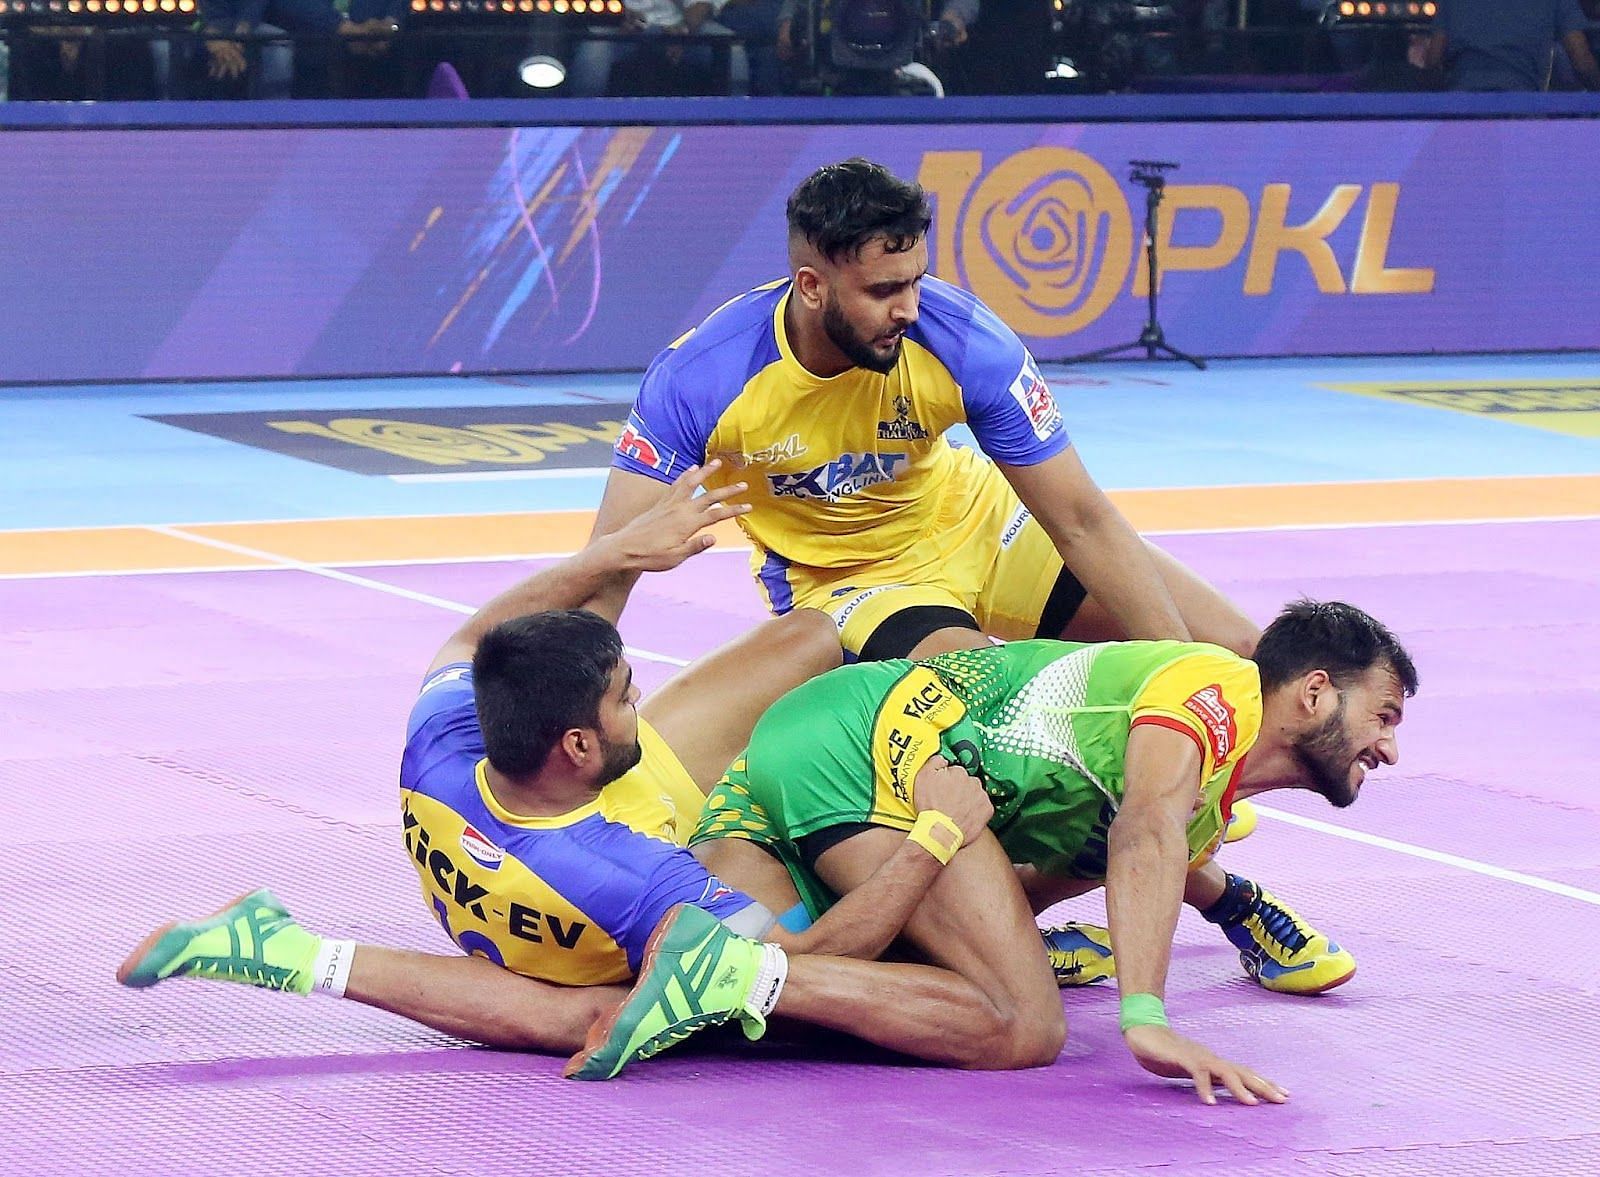 Sahil Gulia (center) in a failed Super tackle with Mohit (Credits: PKL)